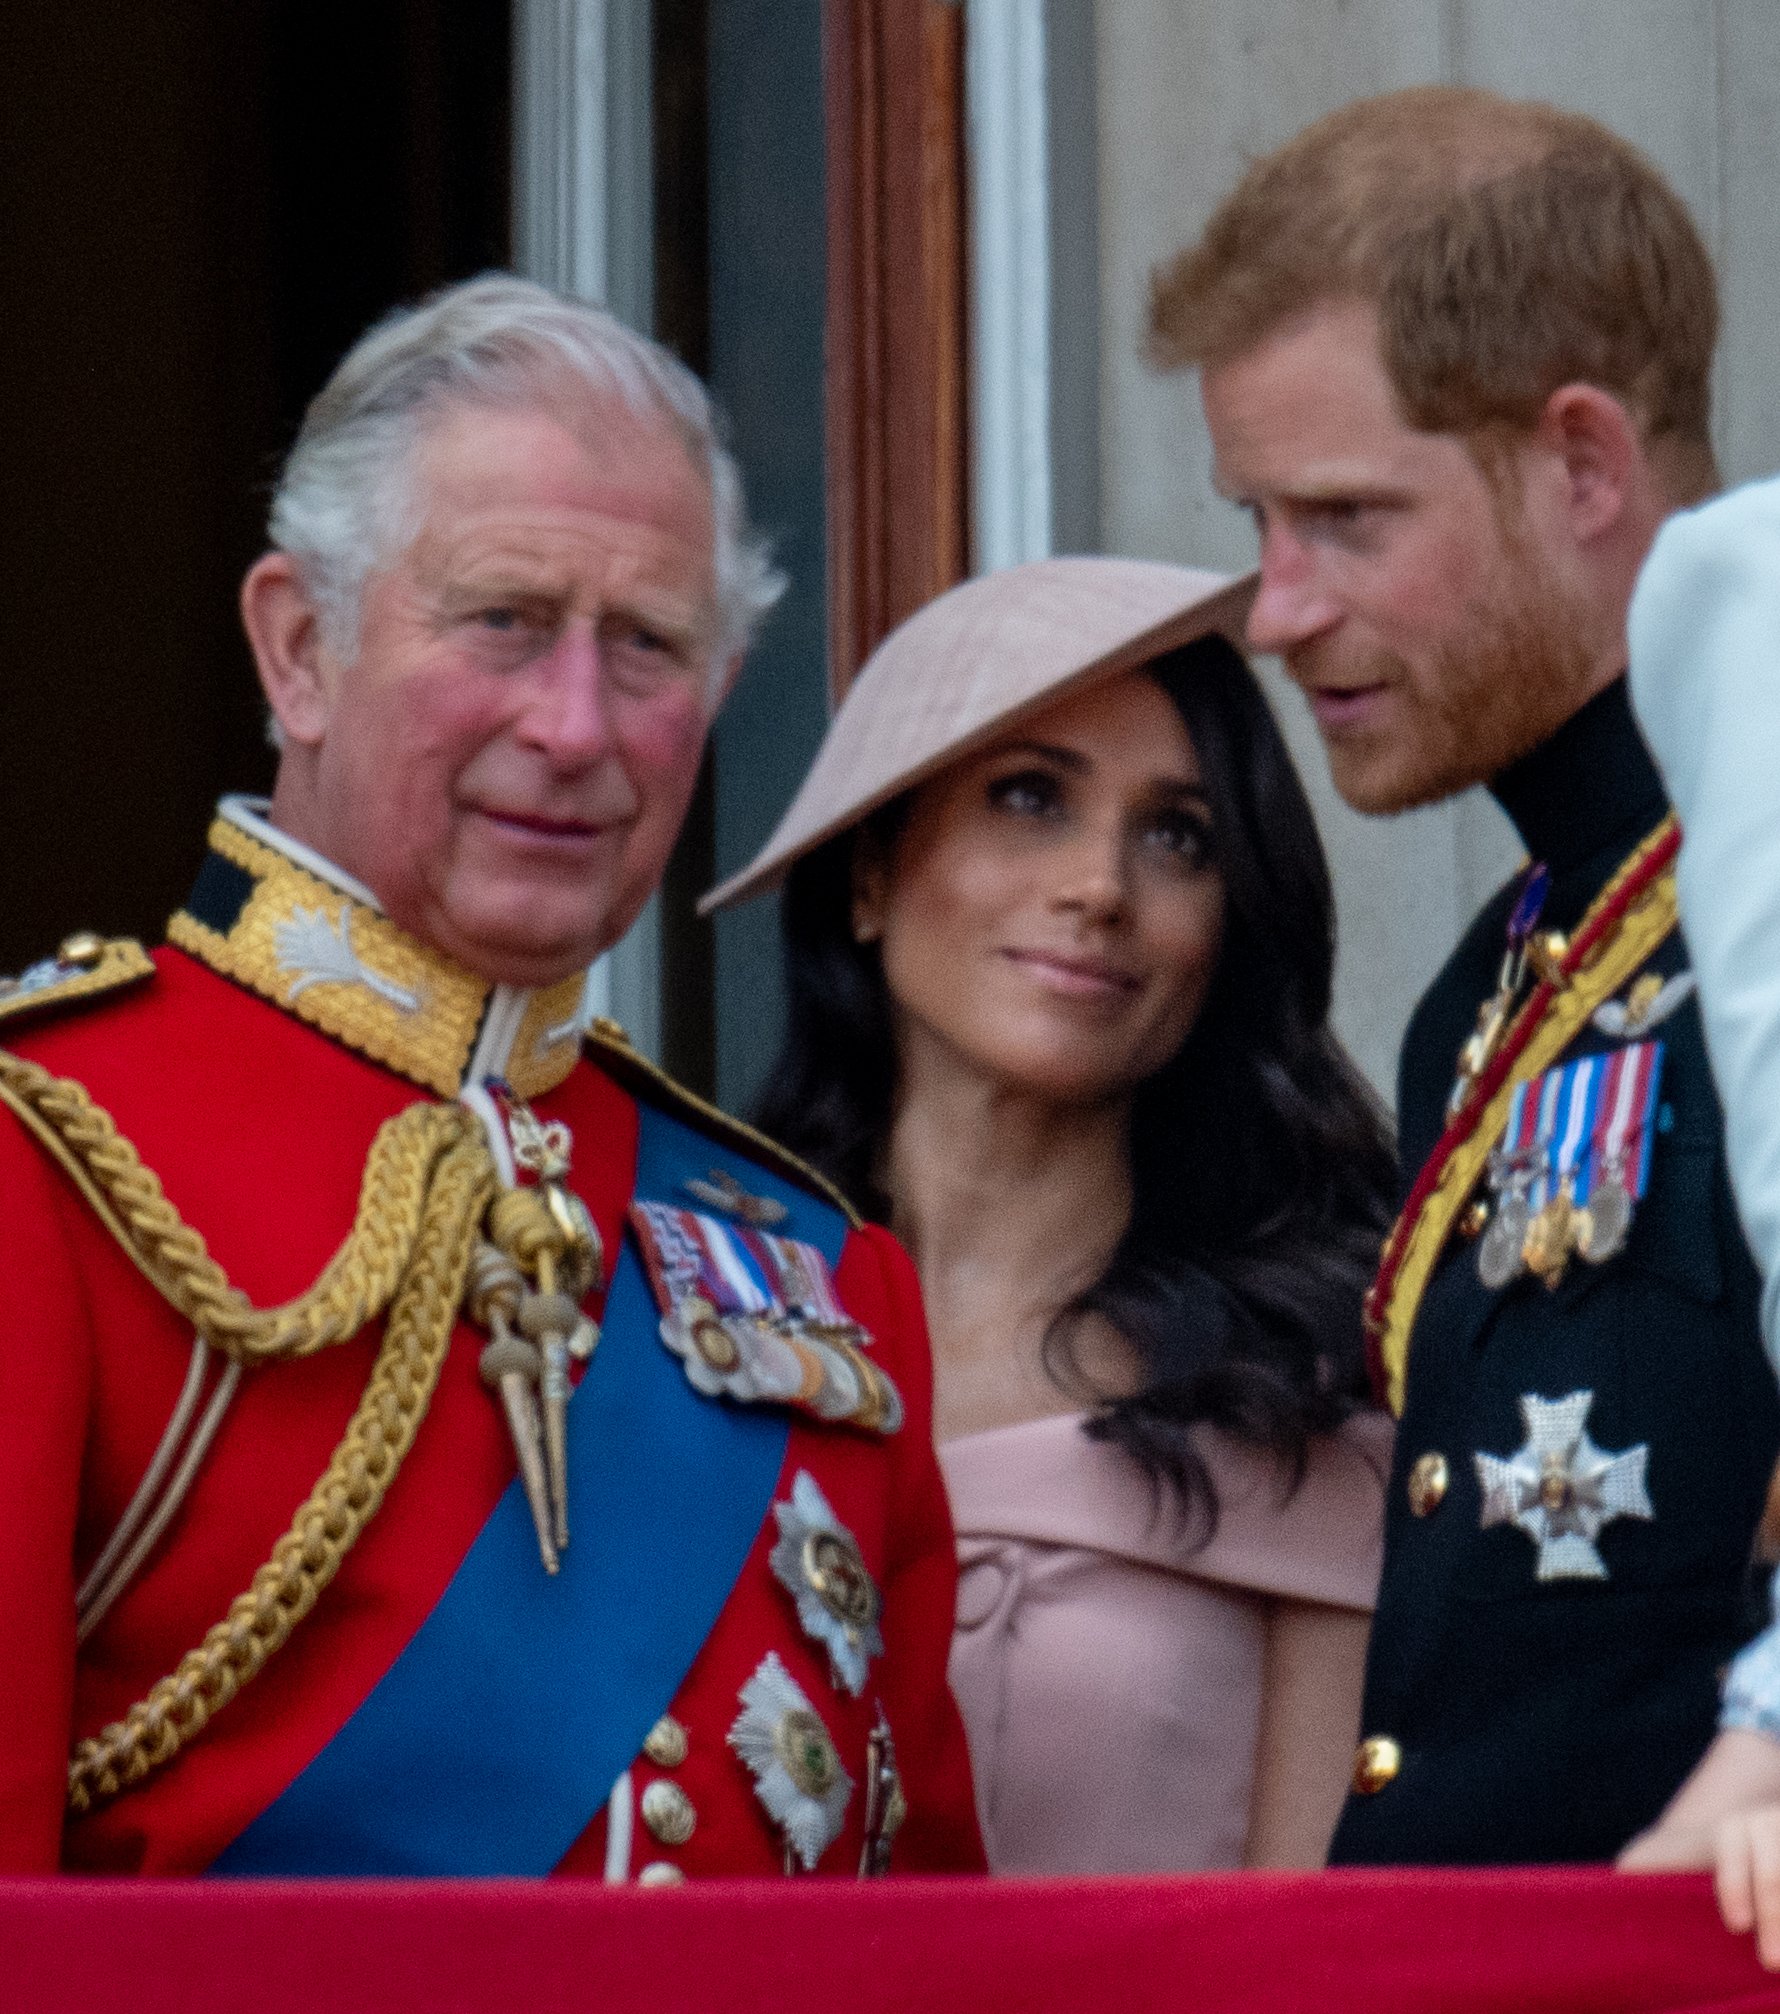 King Charles lll, with Prince Harry, Duke of Sussex and Meghan, Duchess of Sussex during Trooping The Colour 2018 on June 9, 2018 in London, England. | Source: Getty Images